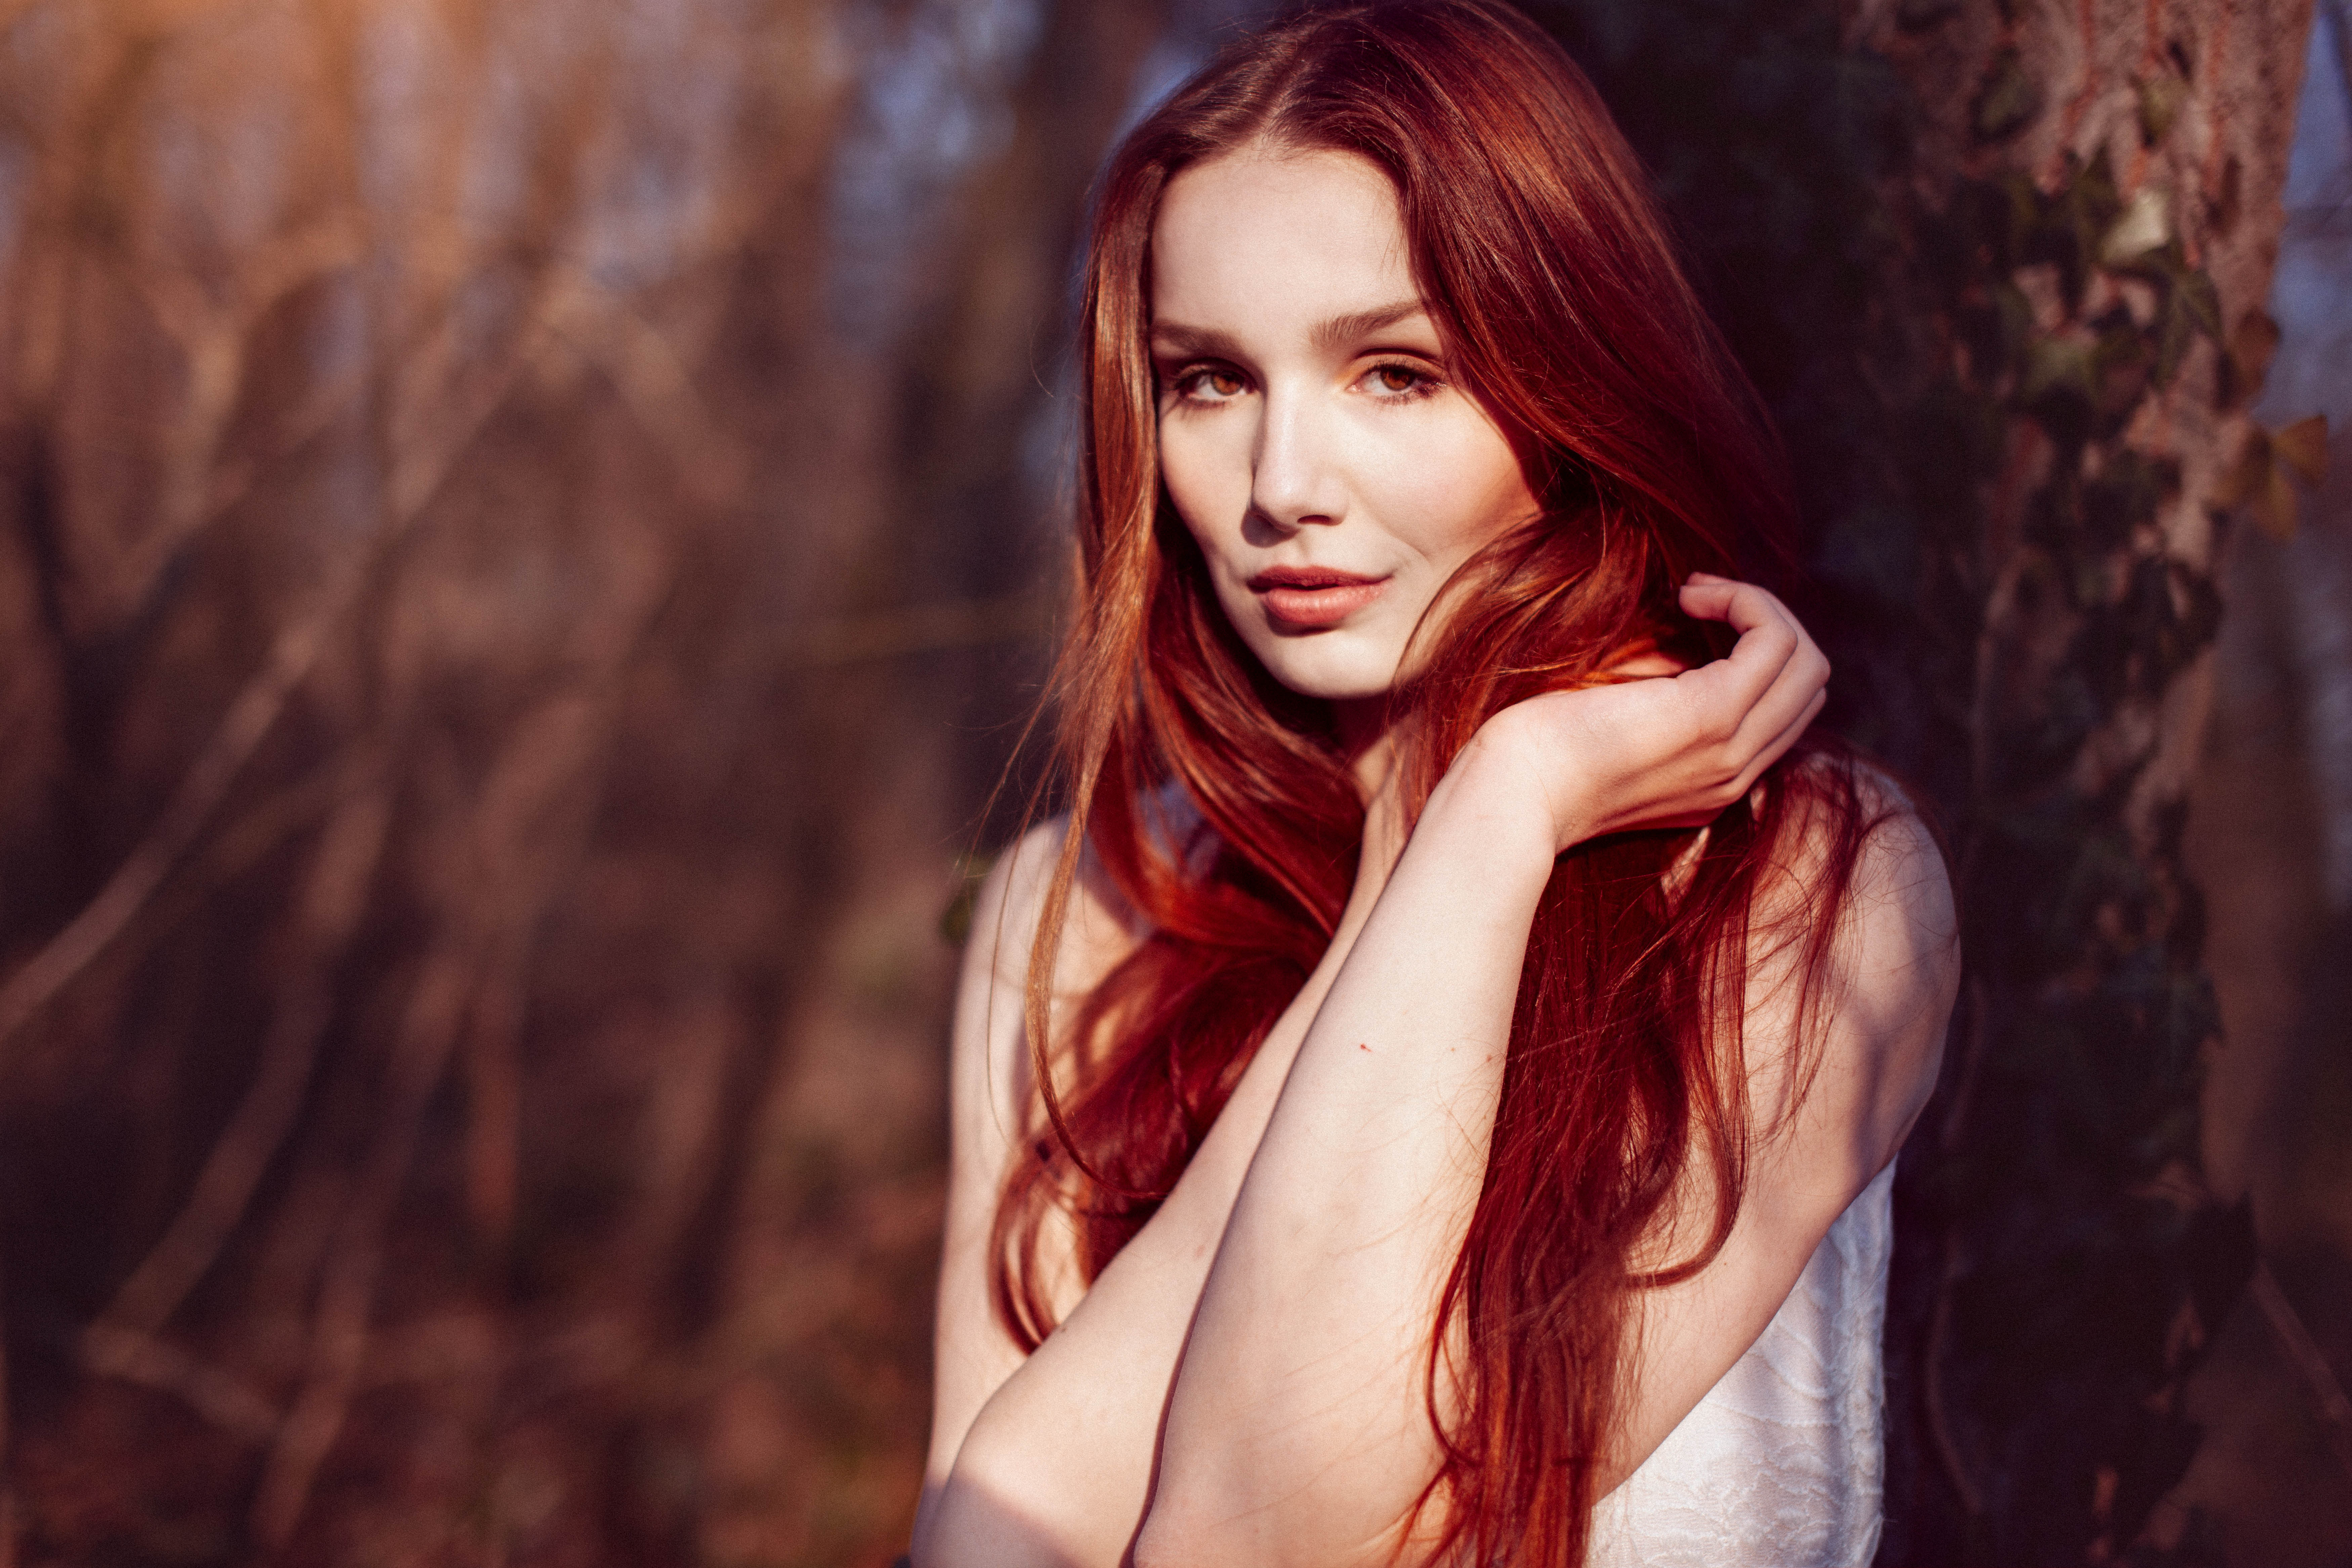 Brown Eyes Model Outdoor Redhead Sunny Woman 7000x4667